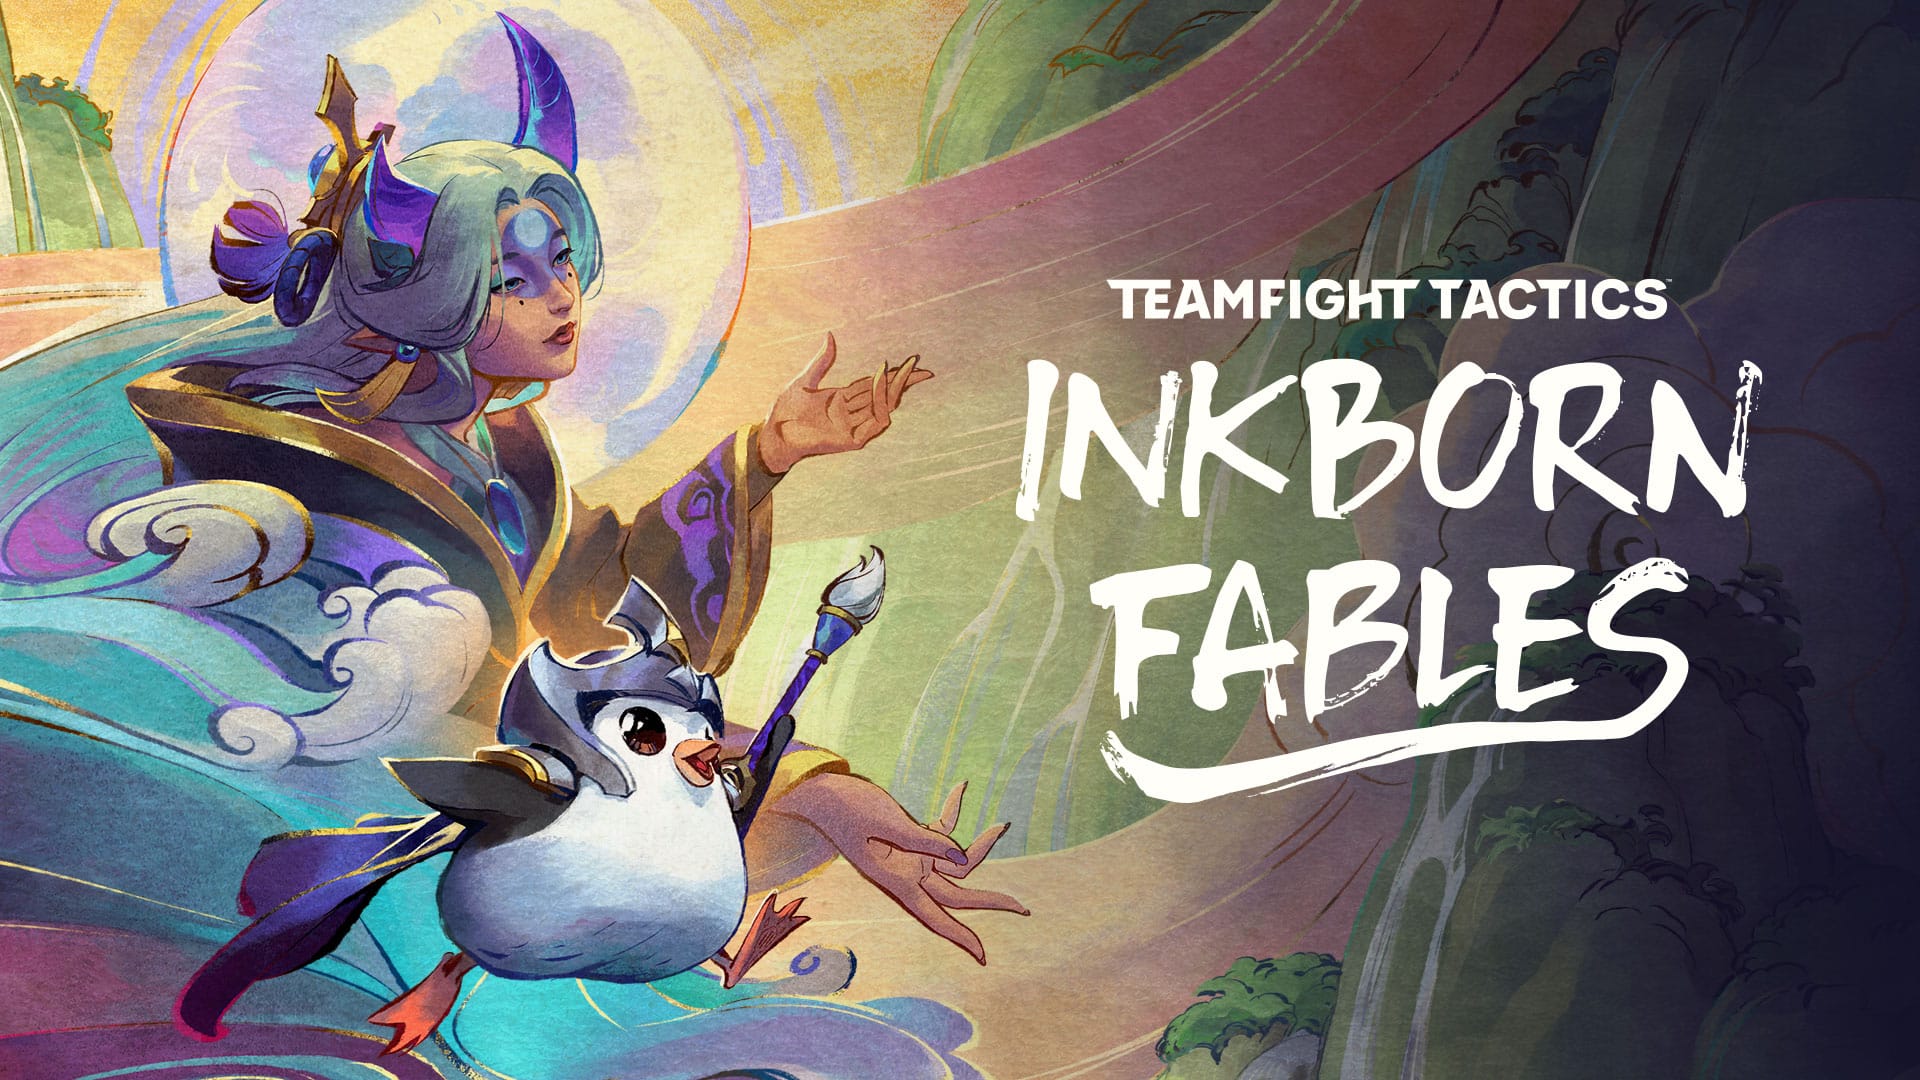 Inkborn Fables: Whimsical Wonders Await in Teamfight Tactics' Newest Adventure